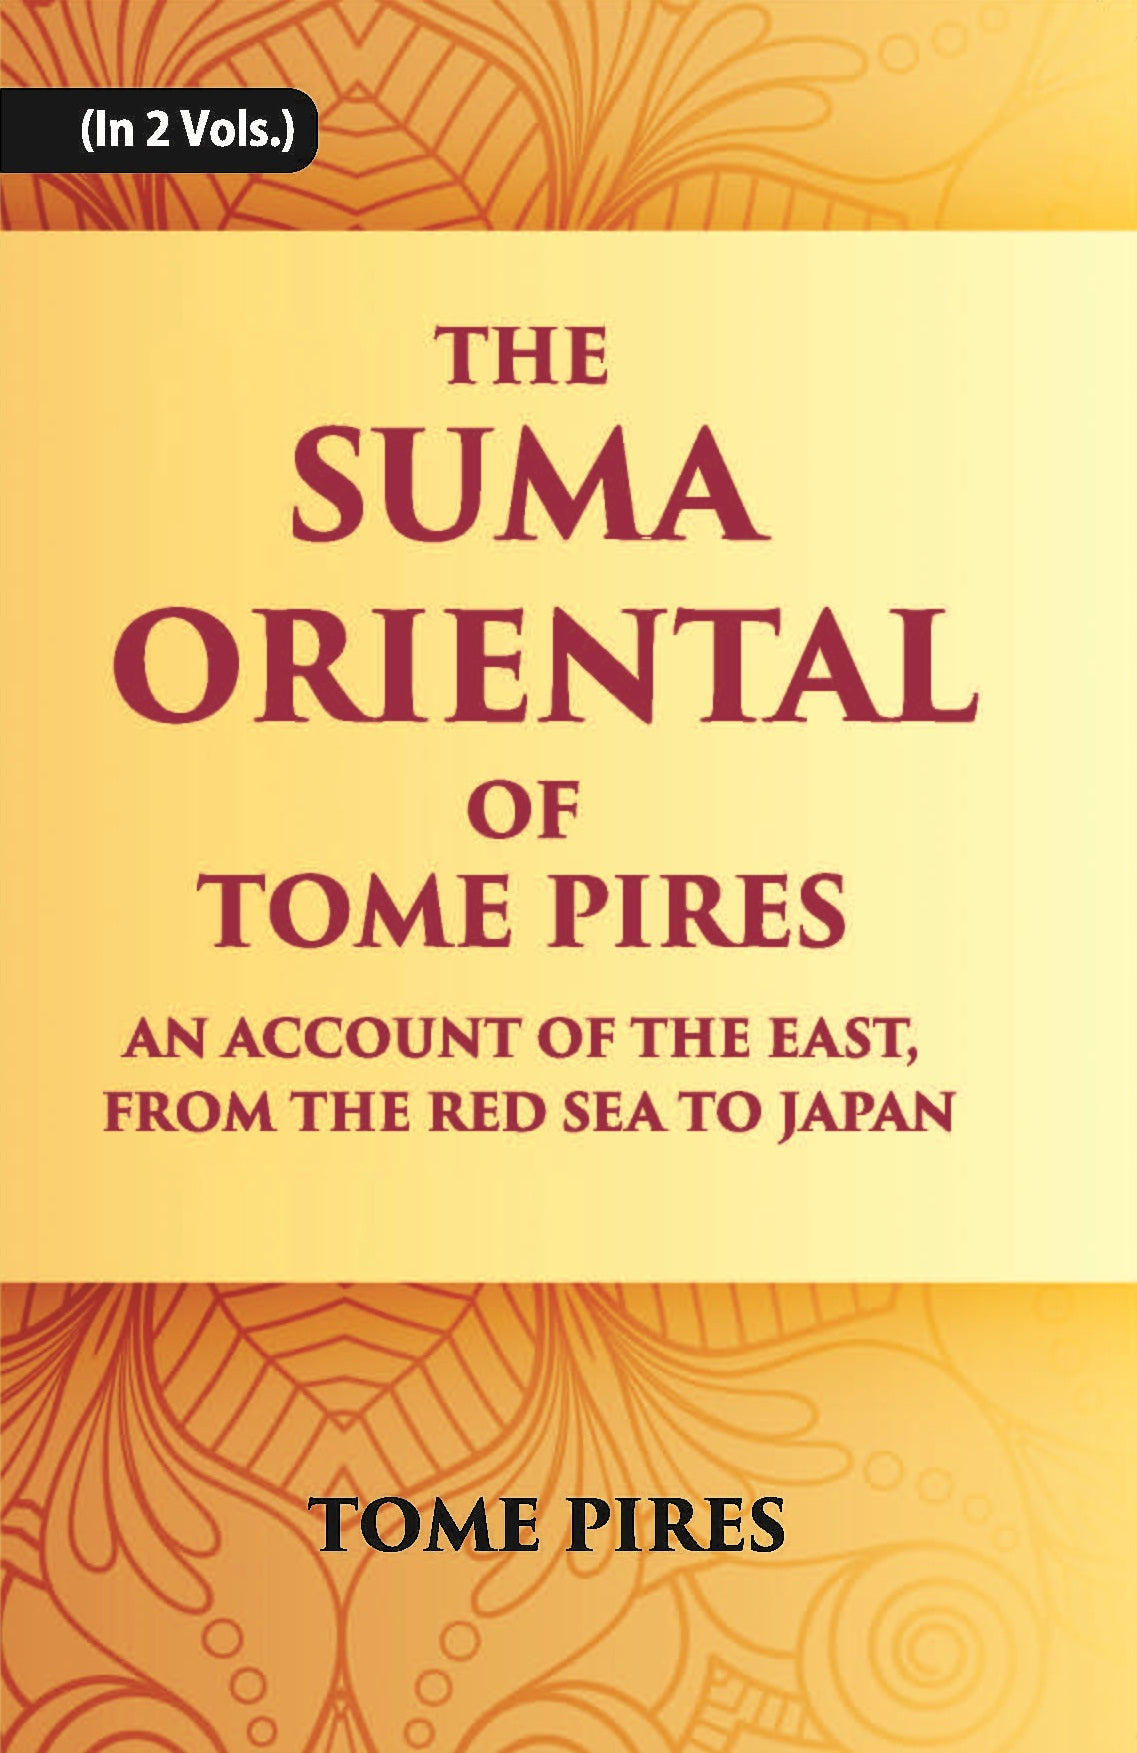 The Suma Oriental Of Tome Pires: An Account Of The East, From The Red Sea To Japan, Written In Malacca And India In 1512-1515 Volume Vol. 2nd